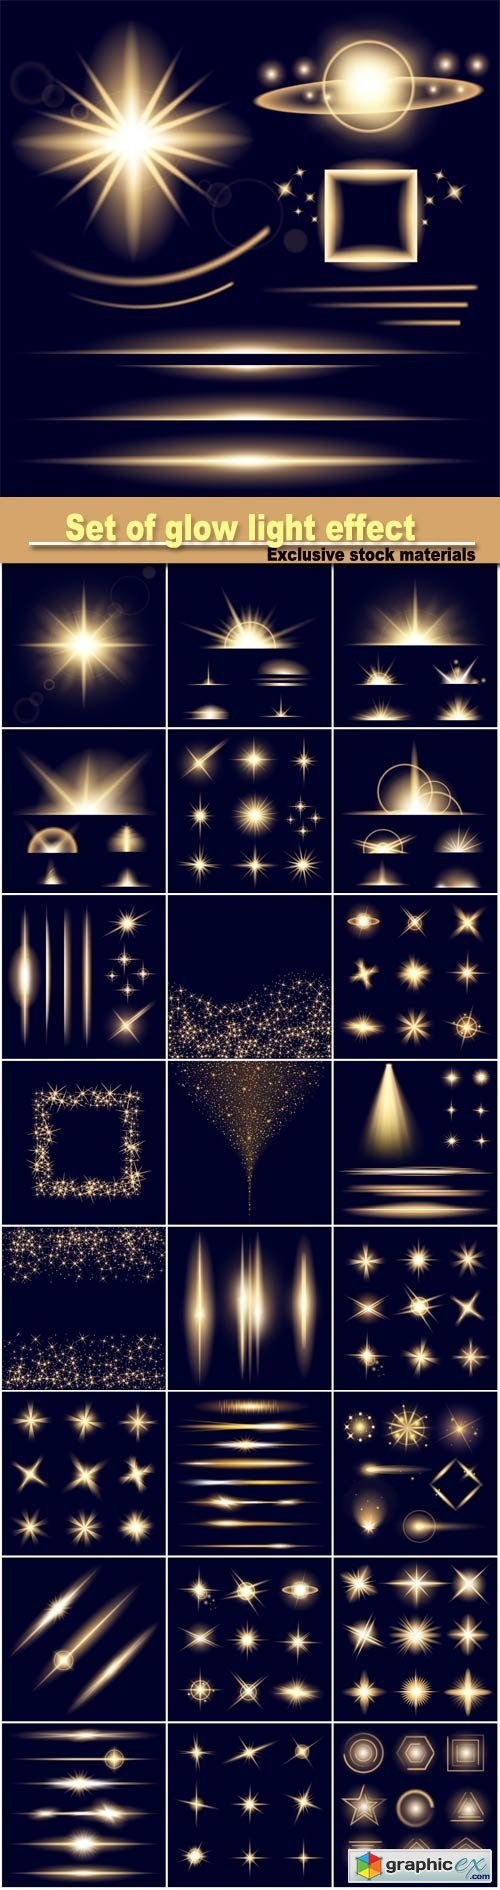 set of glow light effect stars bursts with sparkles isolated on black background